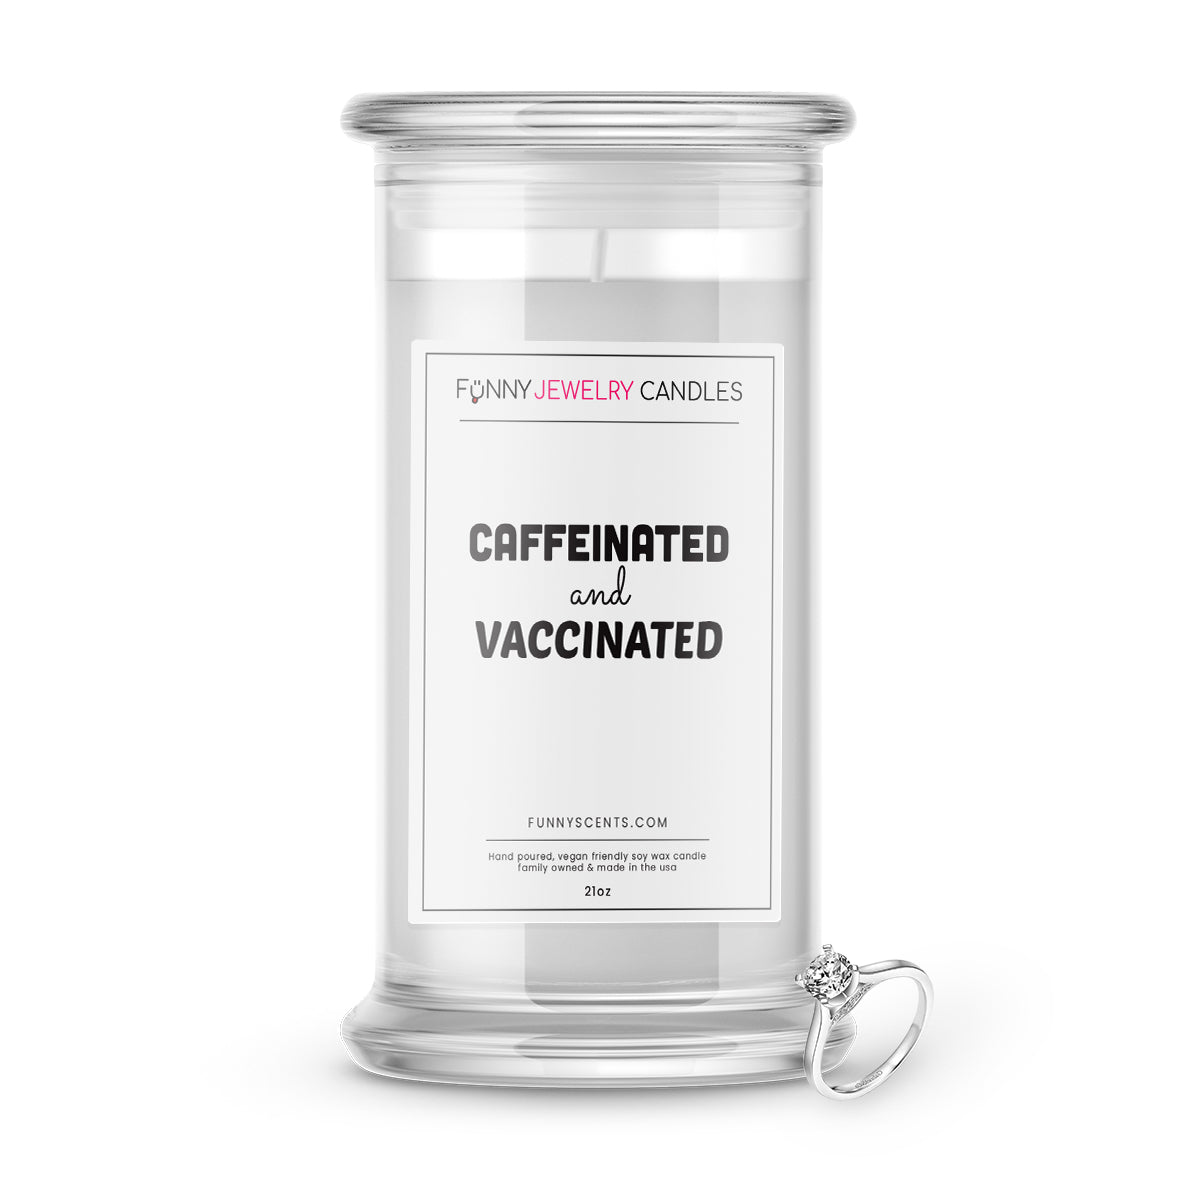 Caffeinated and Vaccinated Jewelry Funny Candles